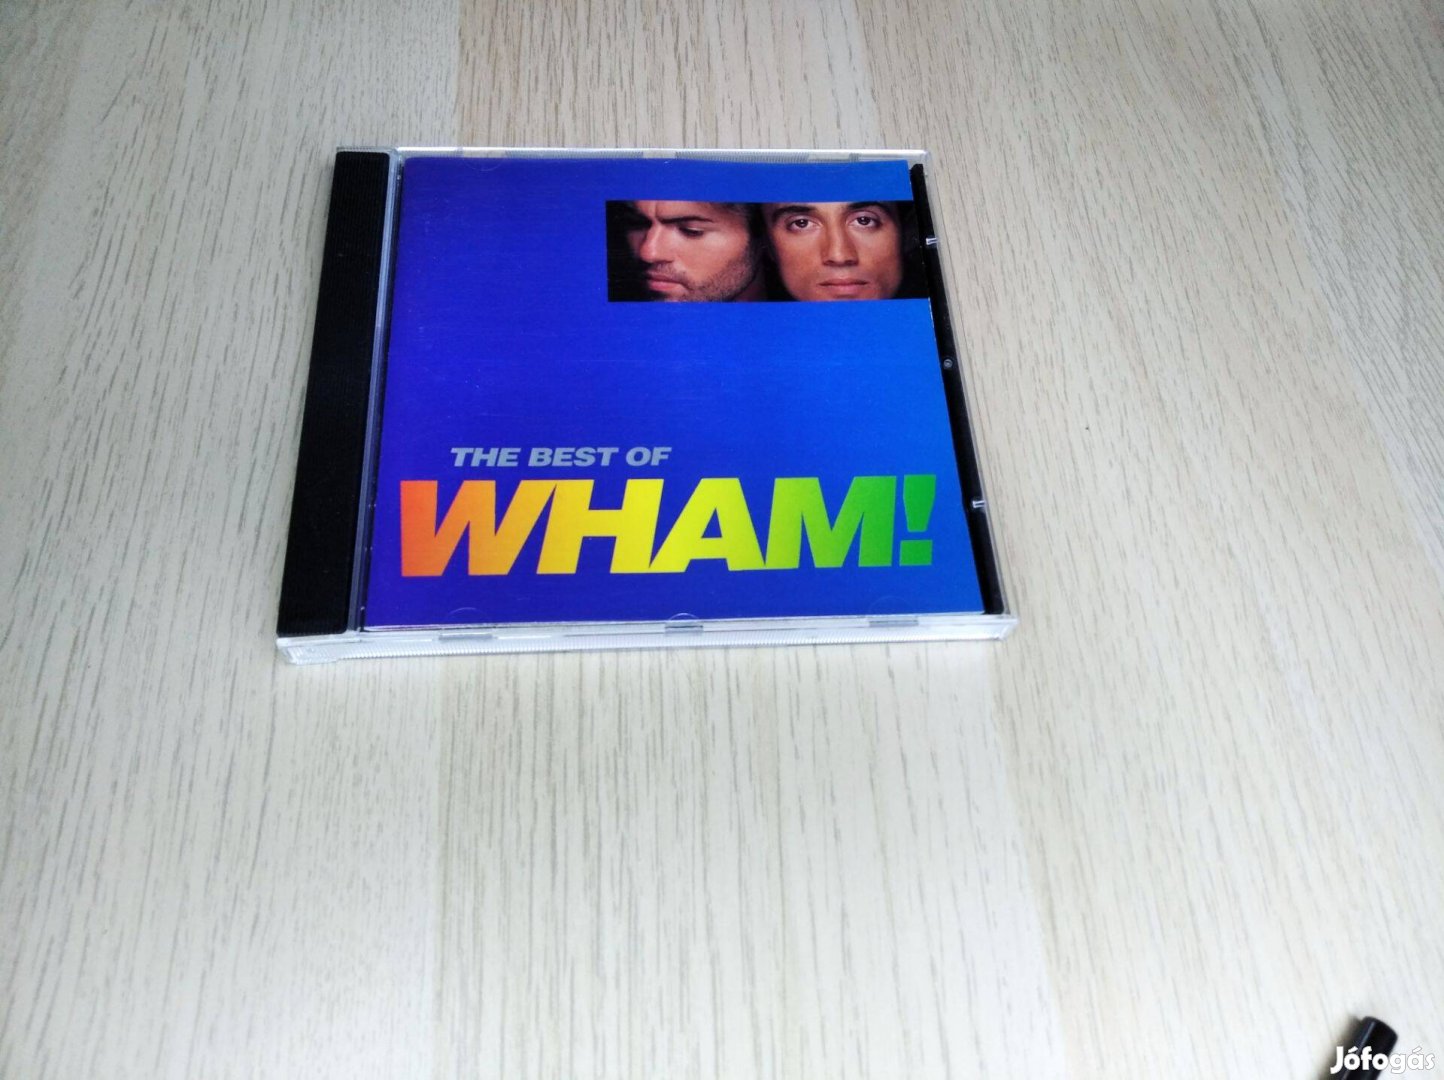 Wham! - The Best Of Wham! (If You Were There.) CD 1997